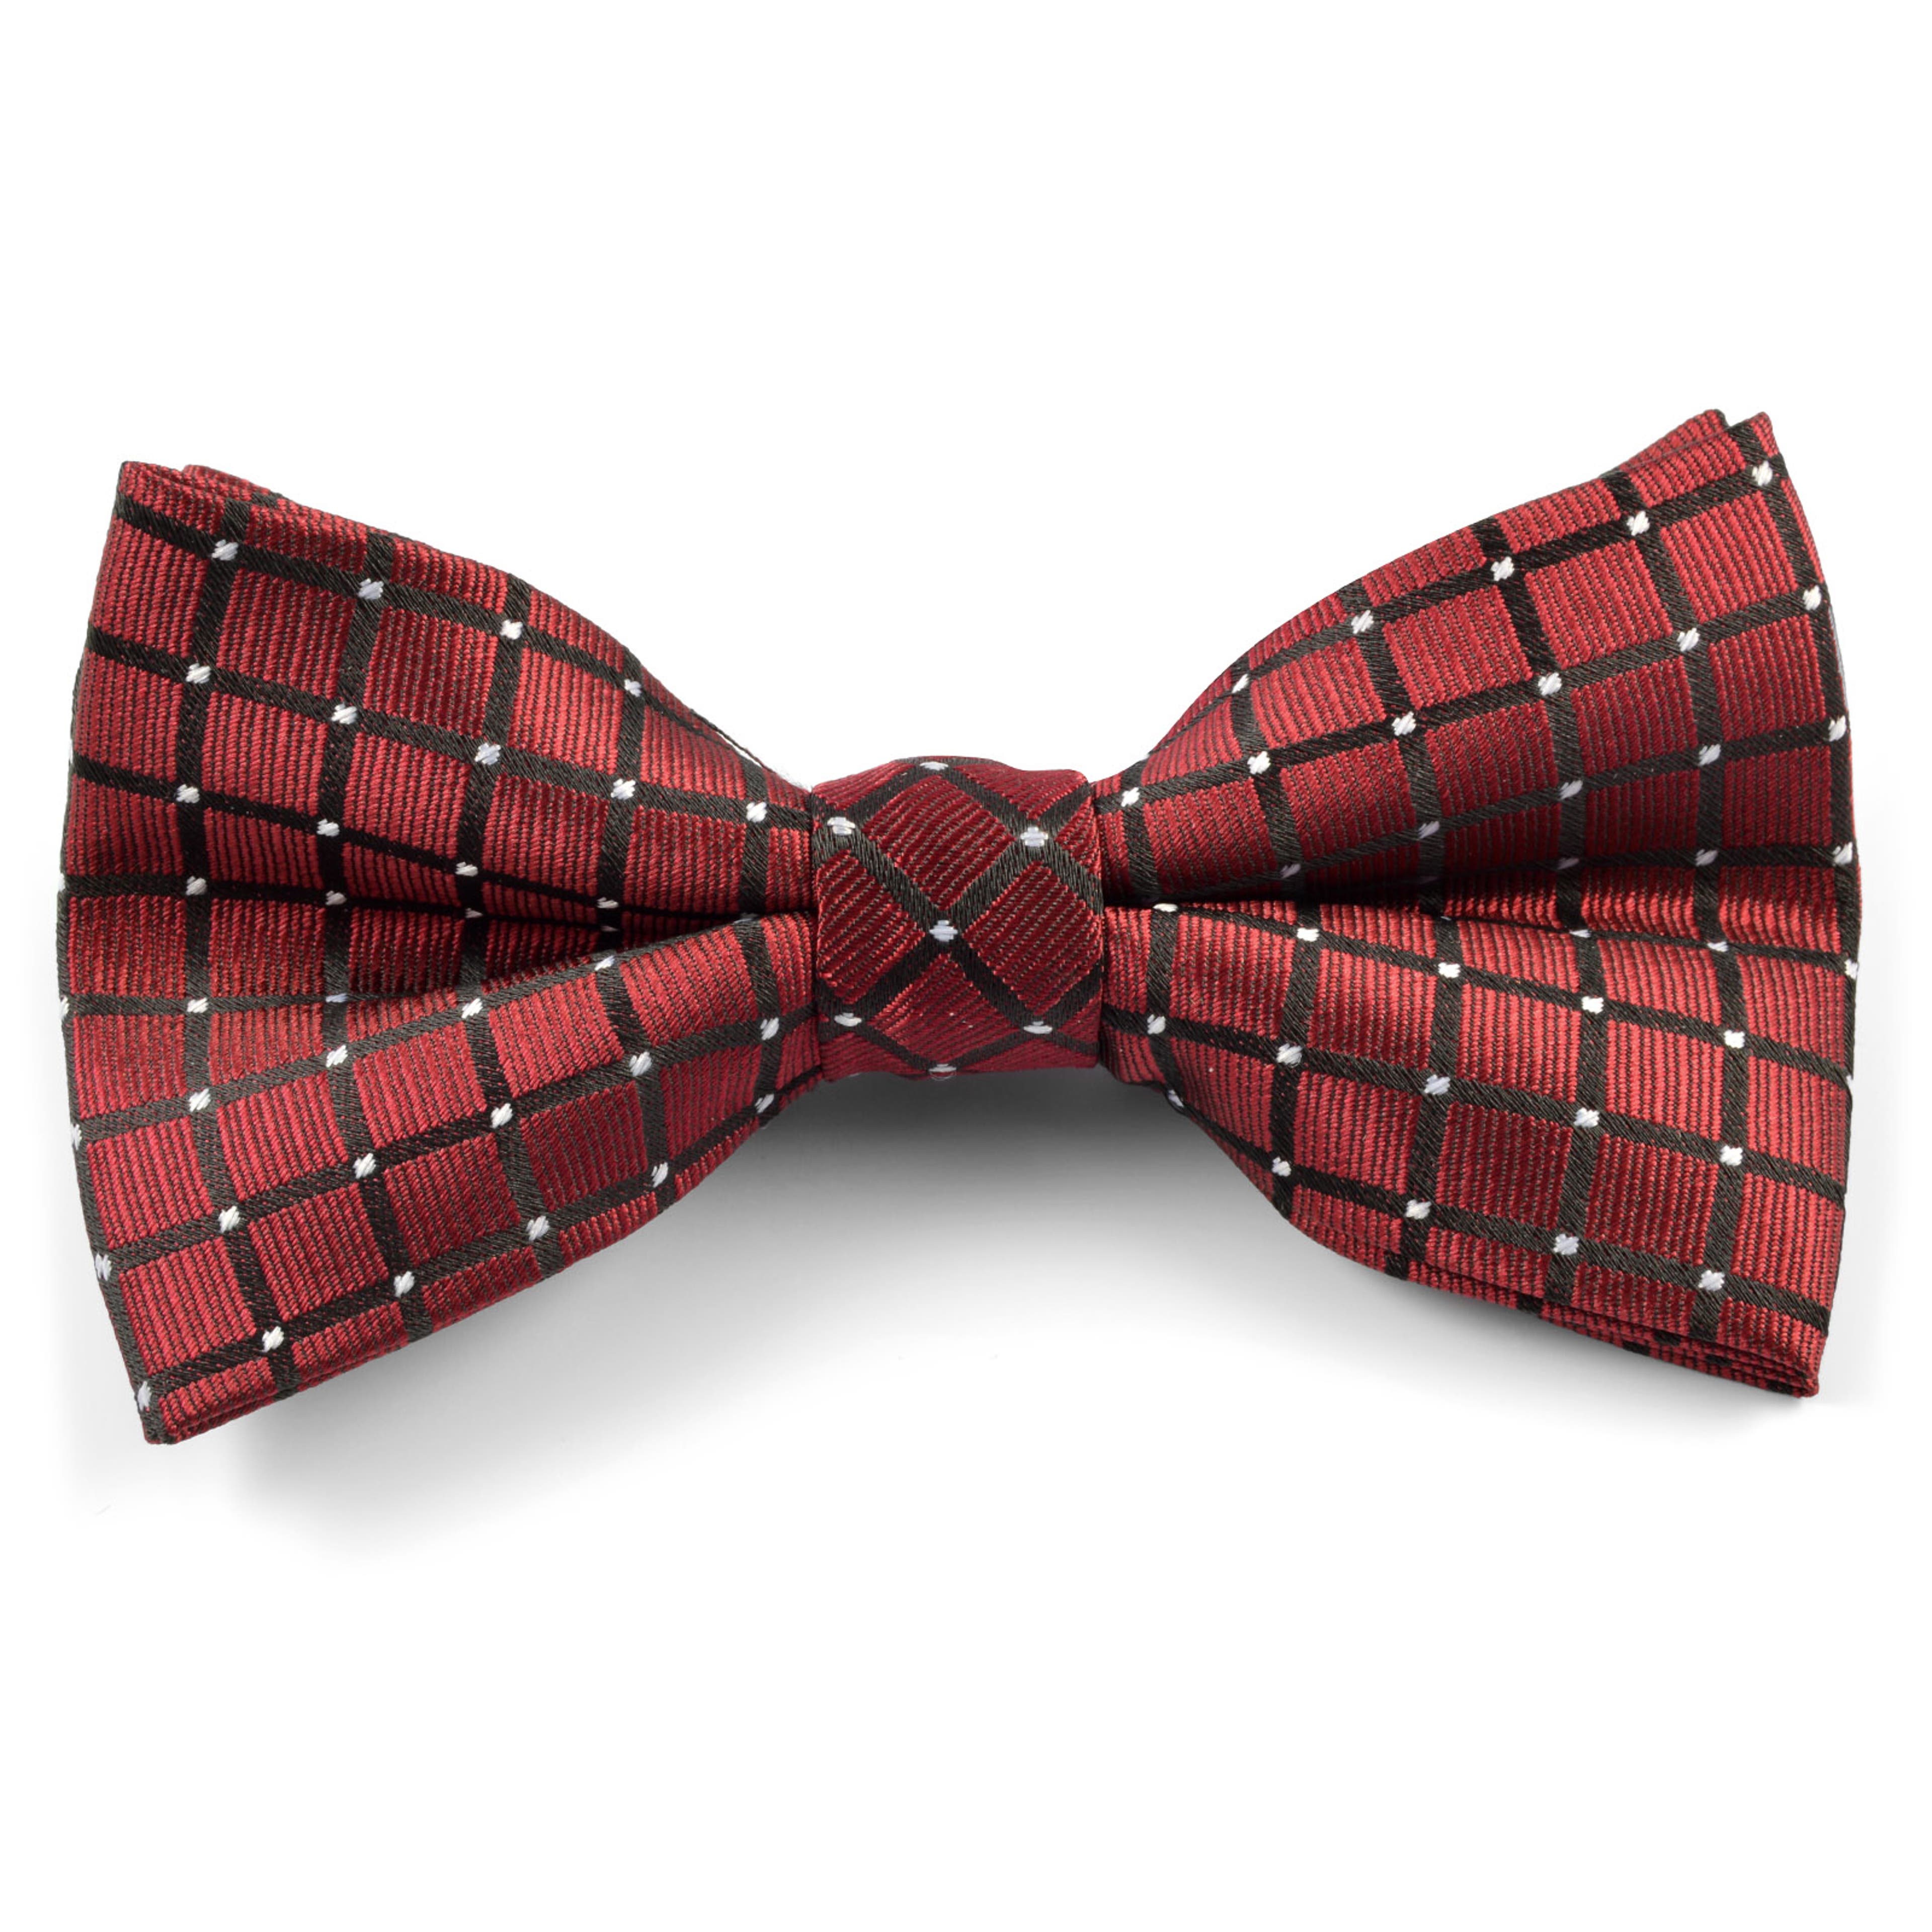 Bordeaux & Black Chequered Pre-Tied Bow Tie